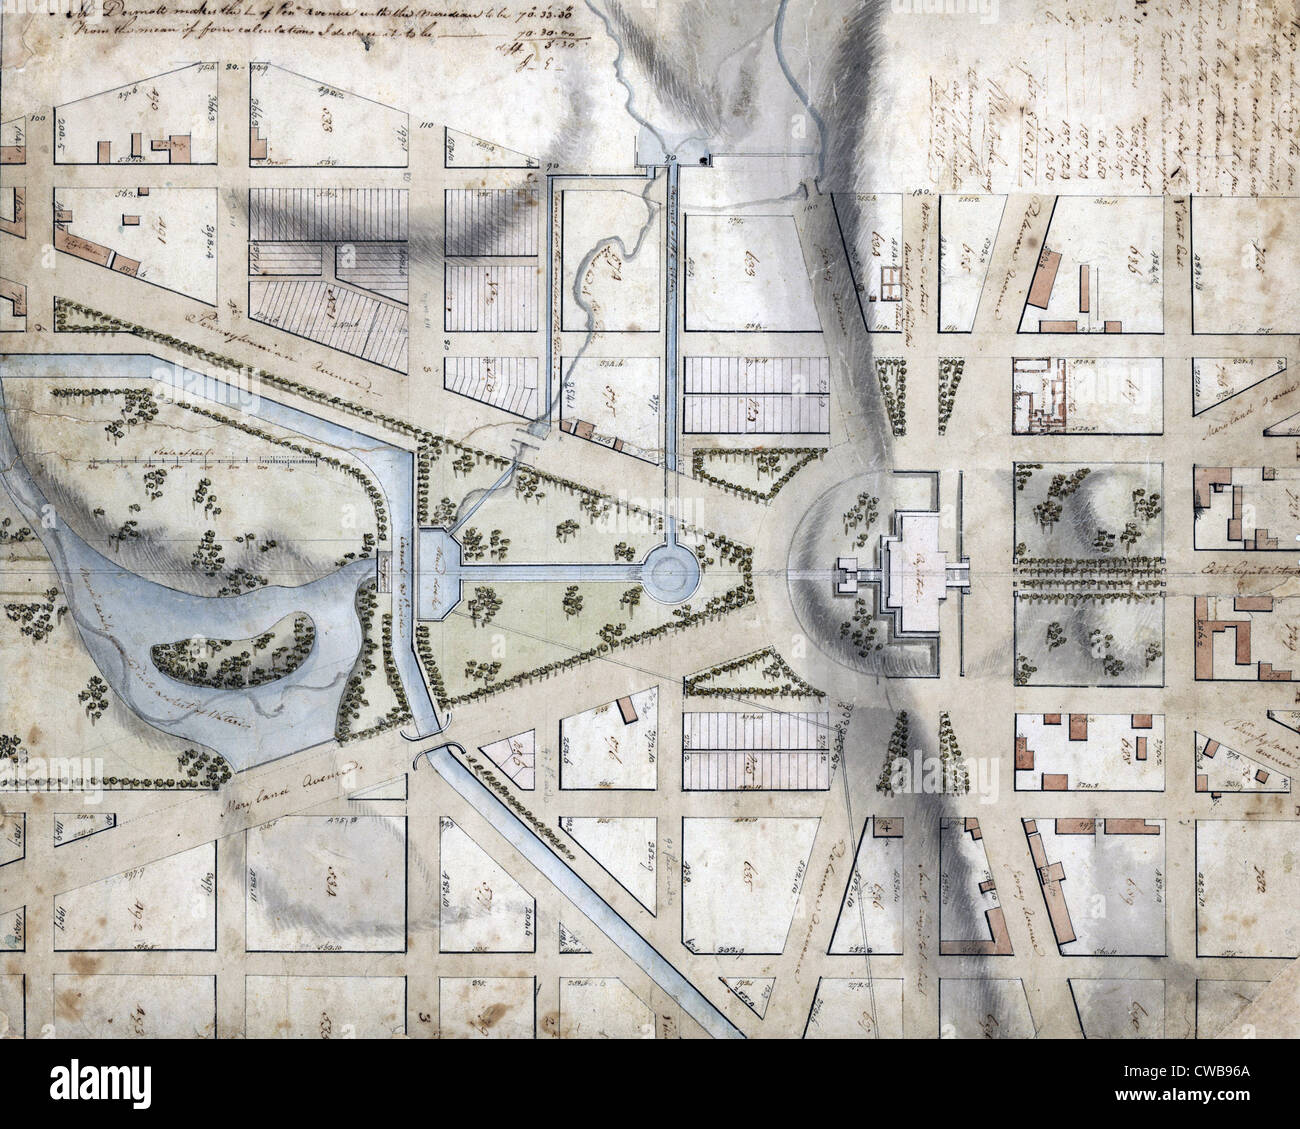 Washington, D.C. Map showing the grounds of the Capitol, District of Columbia, by Benjamin Henry Latrobe, Architect of the Stock Photo